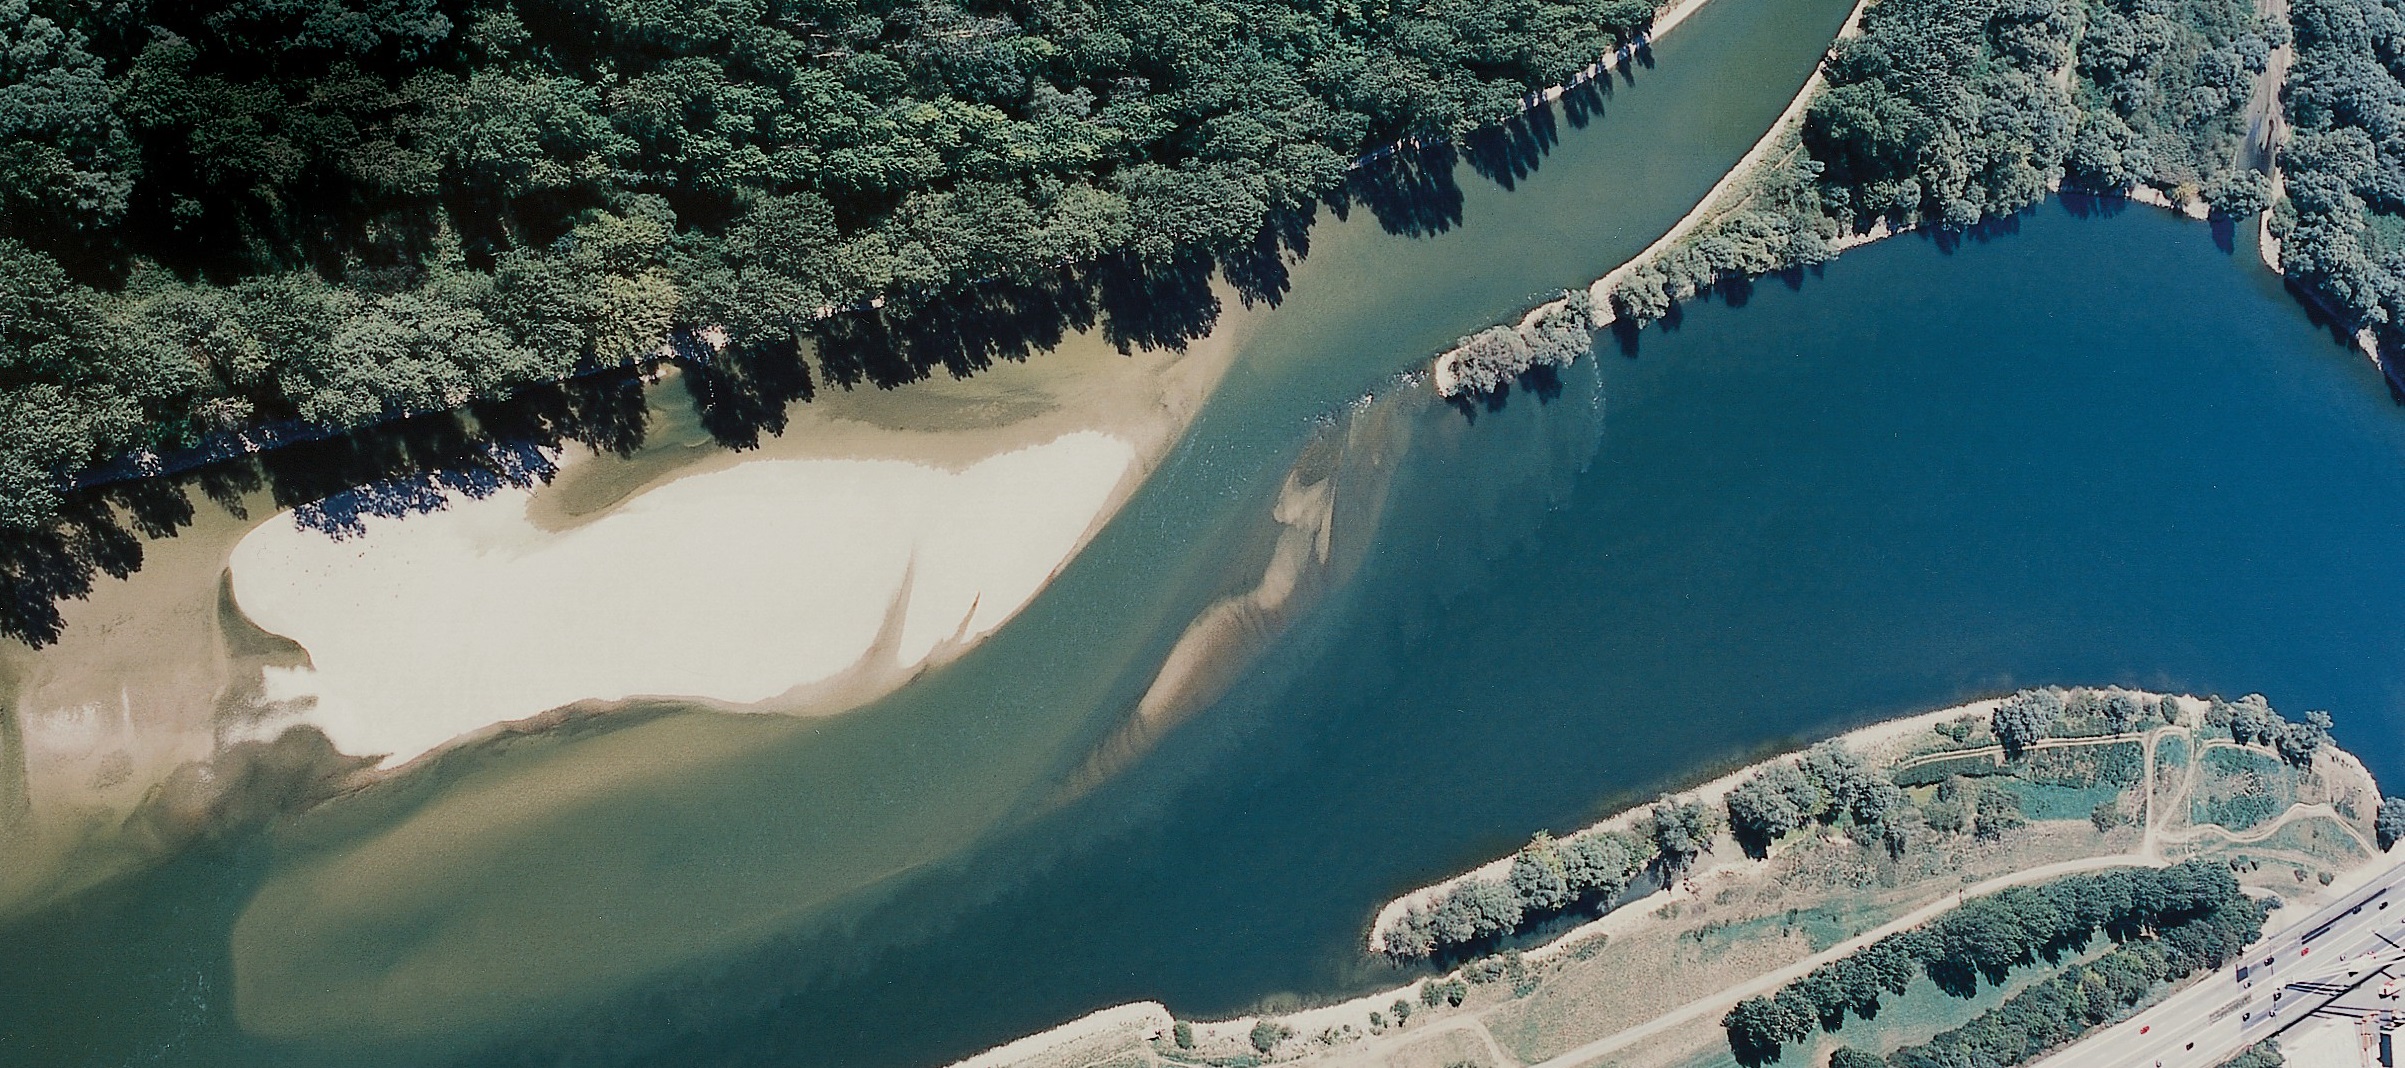 River estuary flowing into a larger river, surrounded by riverine tree and shrub vegetation